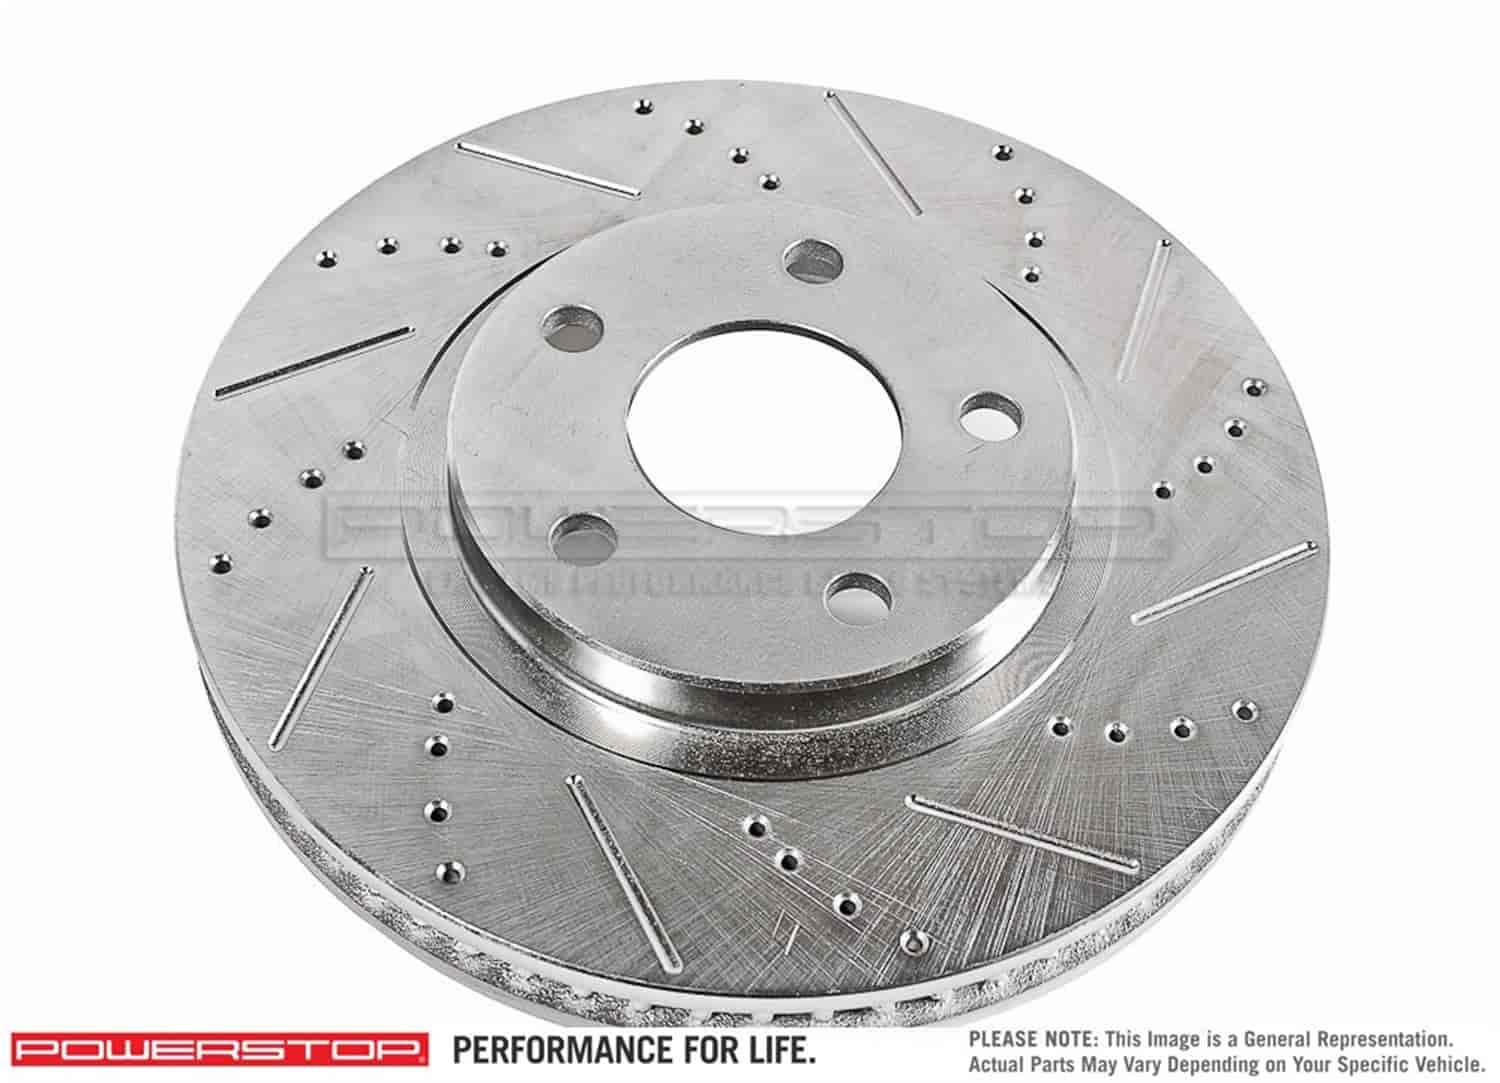 Extreme Performance Drilled And Slotted Brake Rotor Fits Select Ford Van Models [Front Right/Passenger Side]